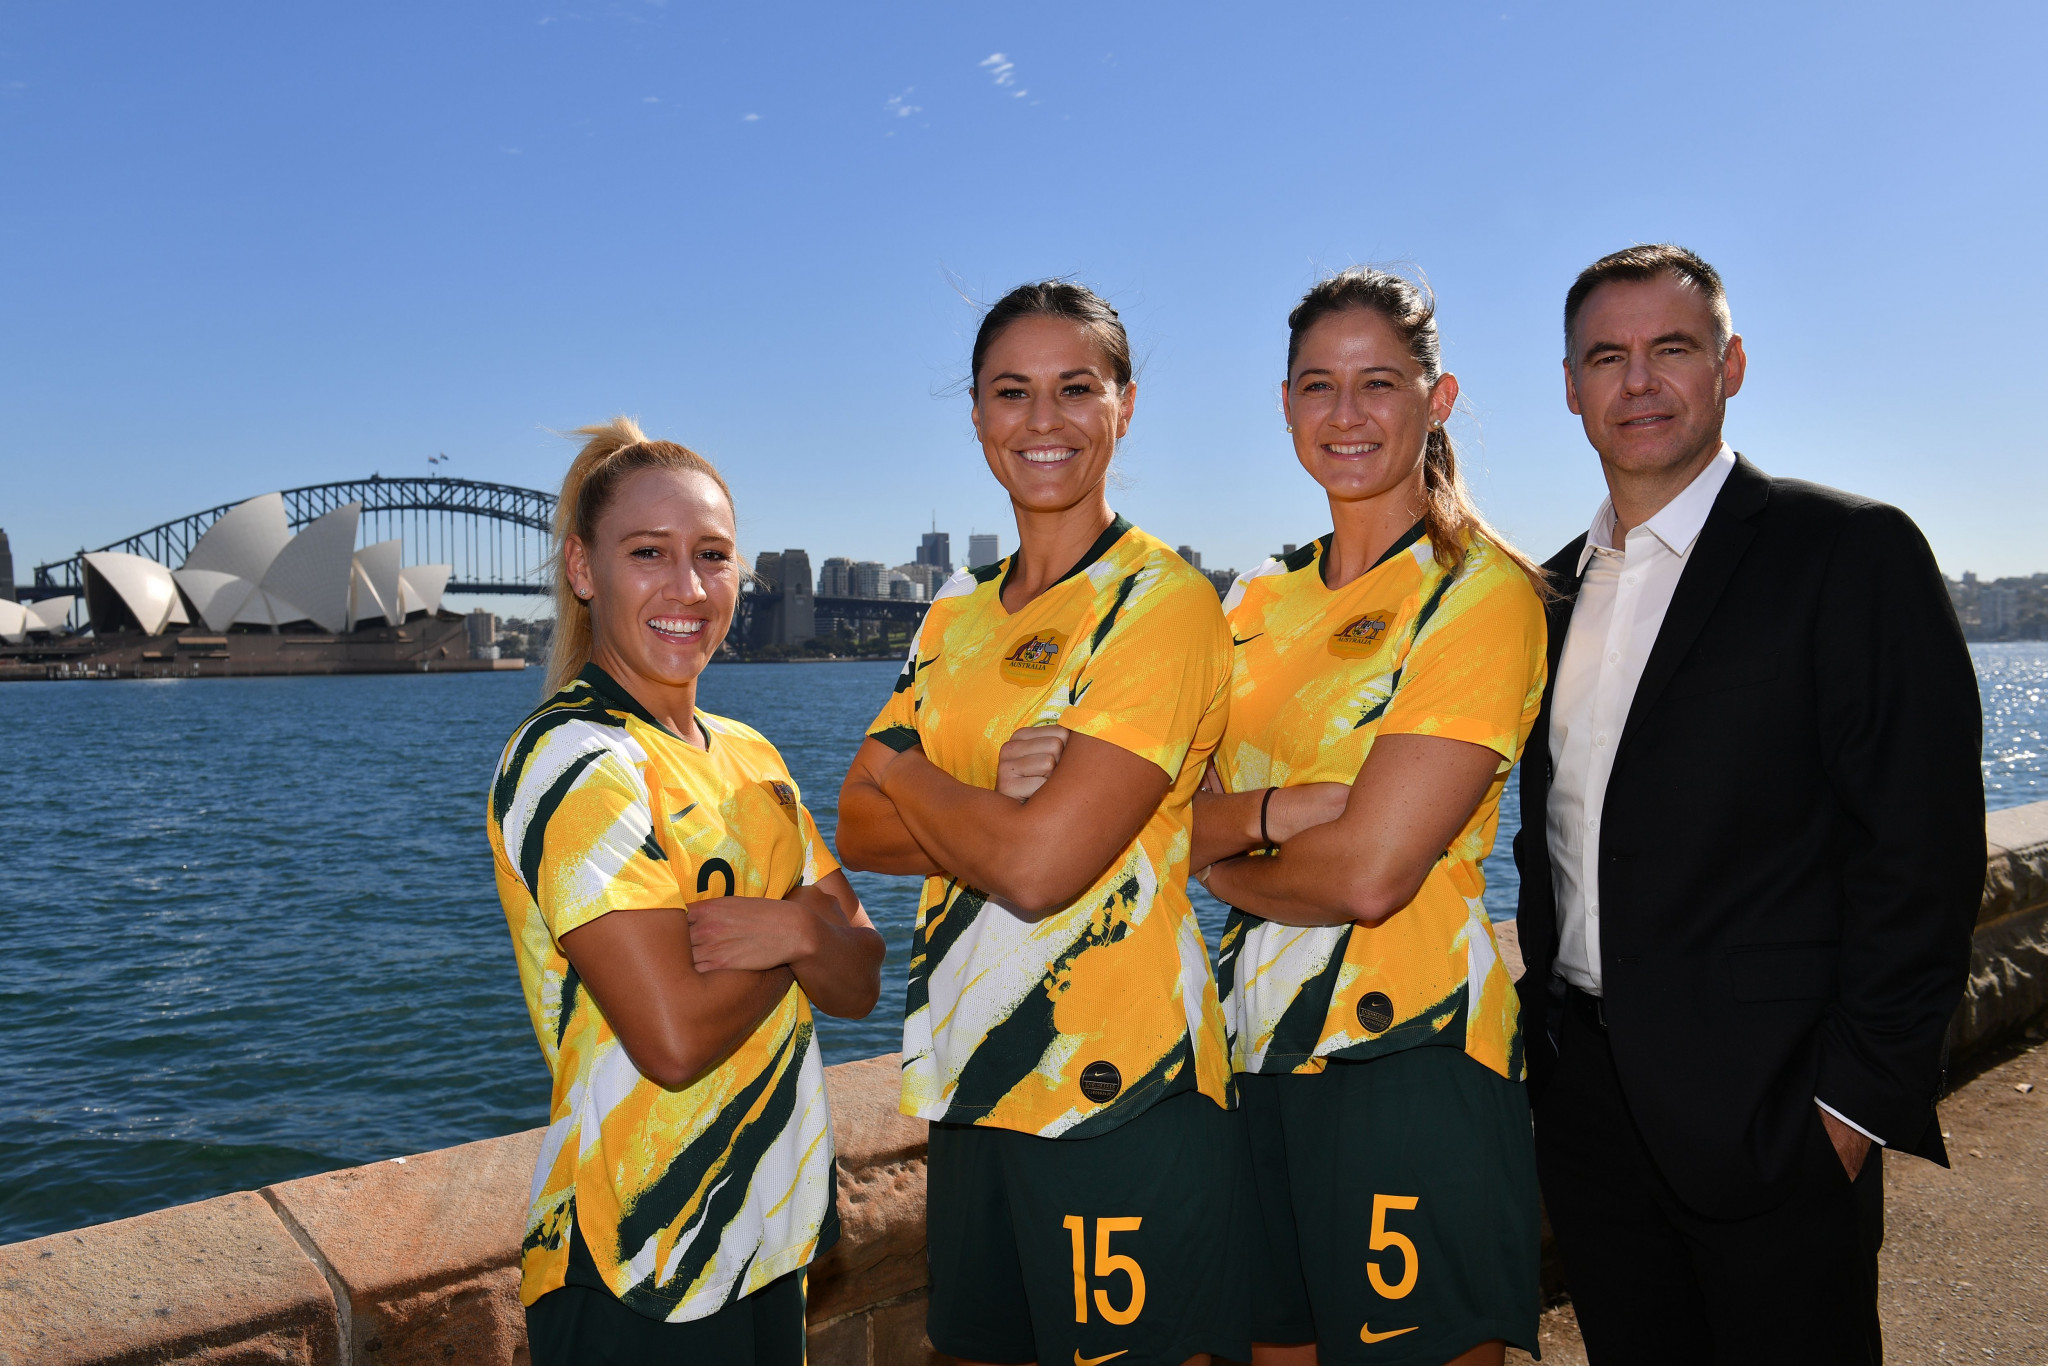 Milicic confirmed as coach of Australia women’s football team for Tokyo 2020 qualification campaign